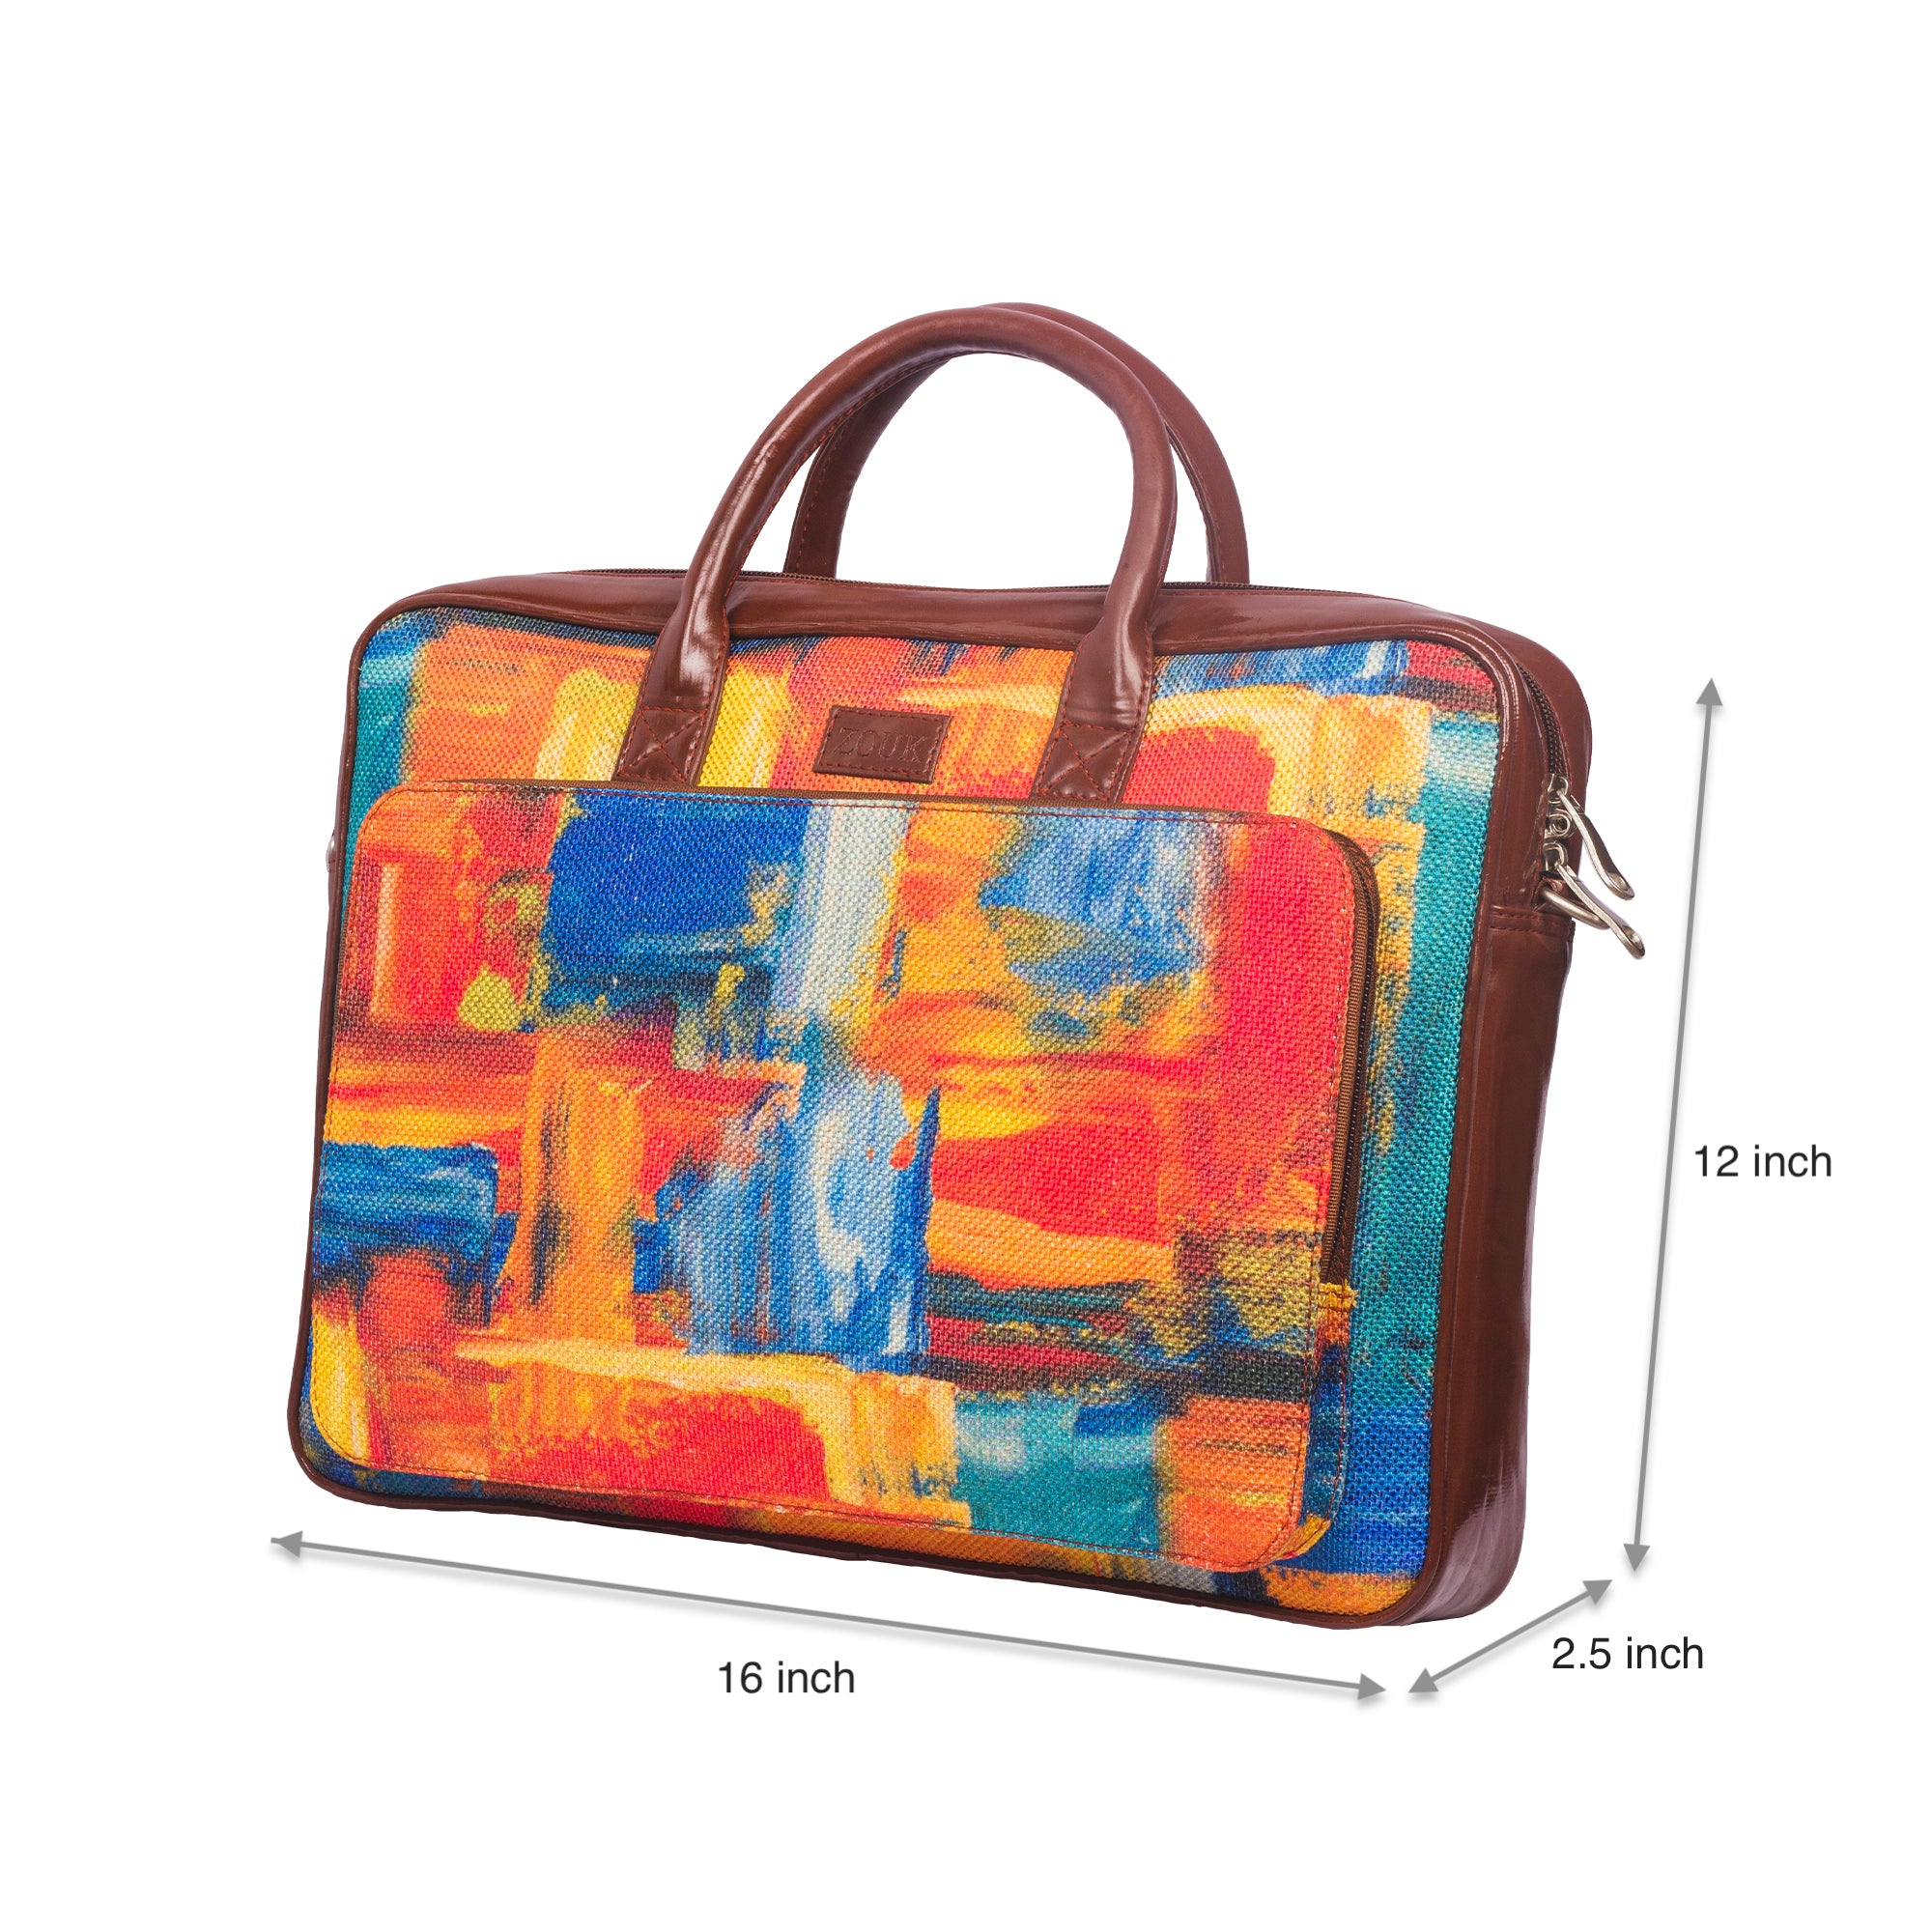 Abstract Amaze Laptop Bag with dimensions